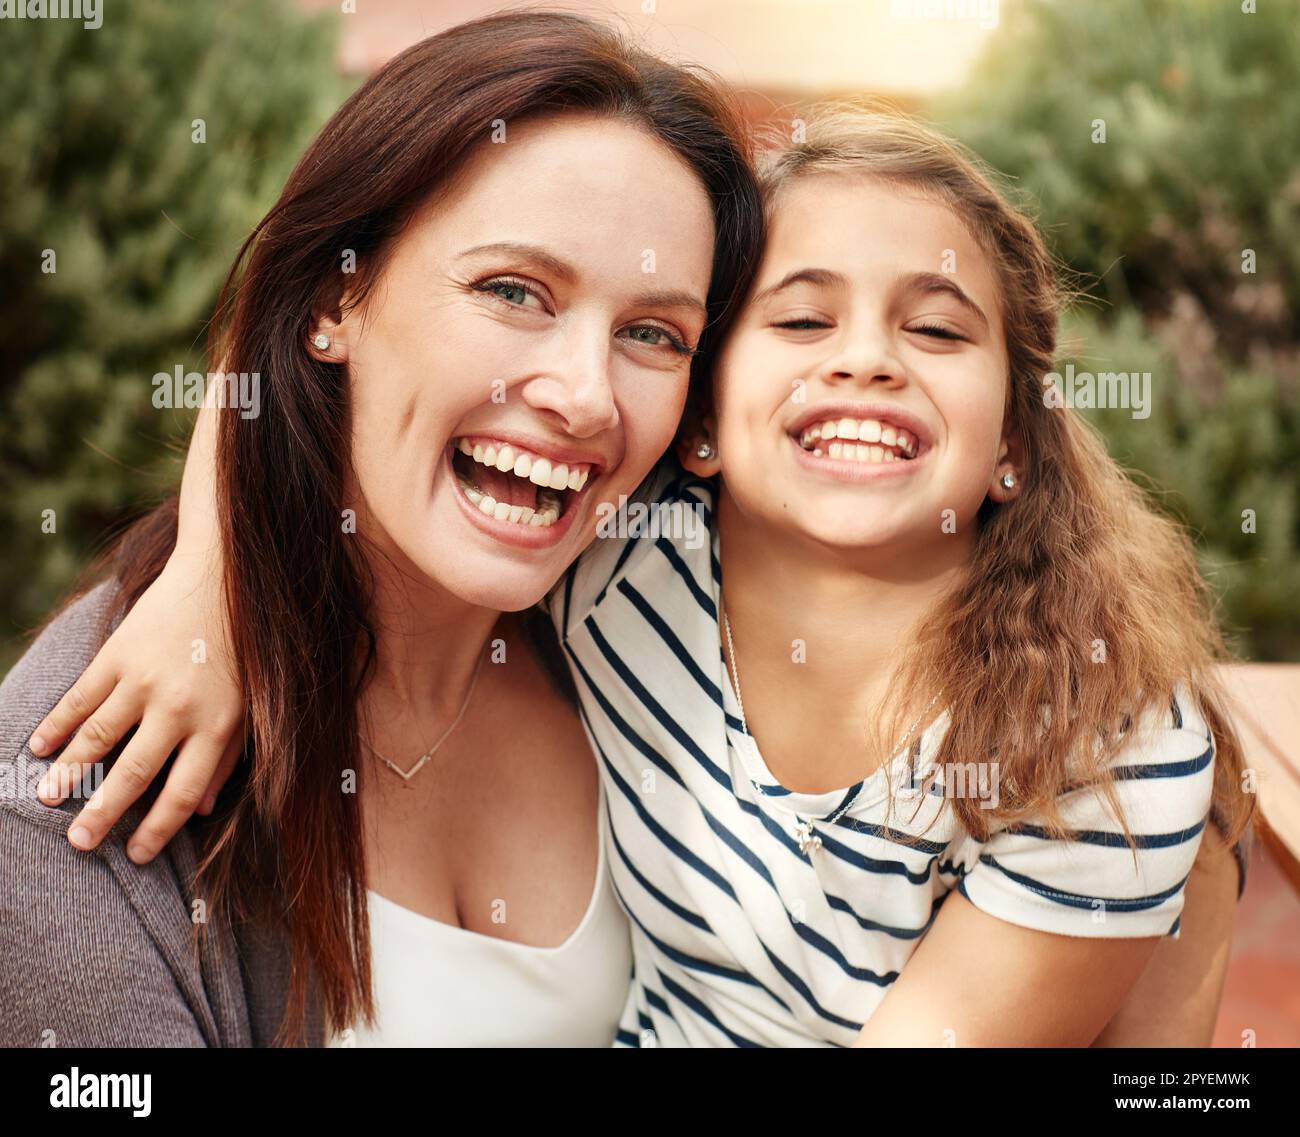 You can see where she gets that smile. A happy mother and daughter spending time together outdoors. Stock Photo